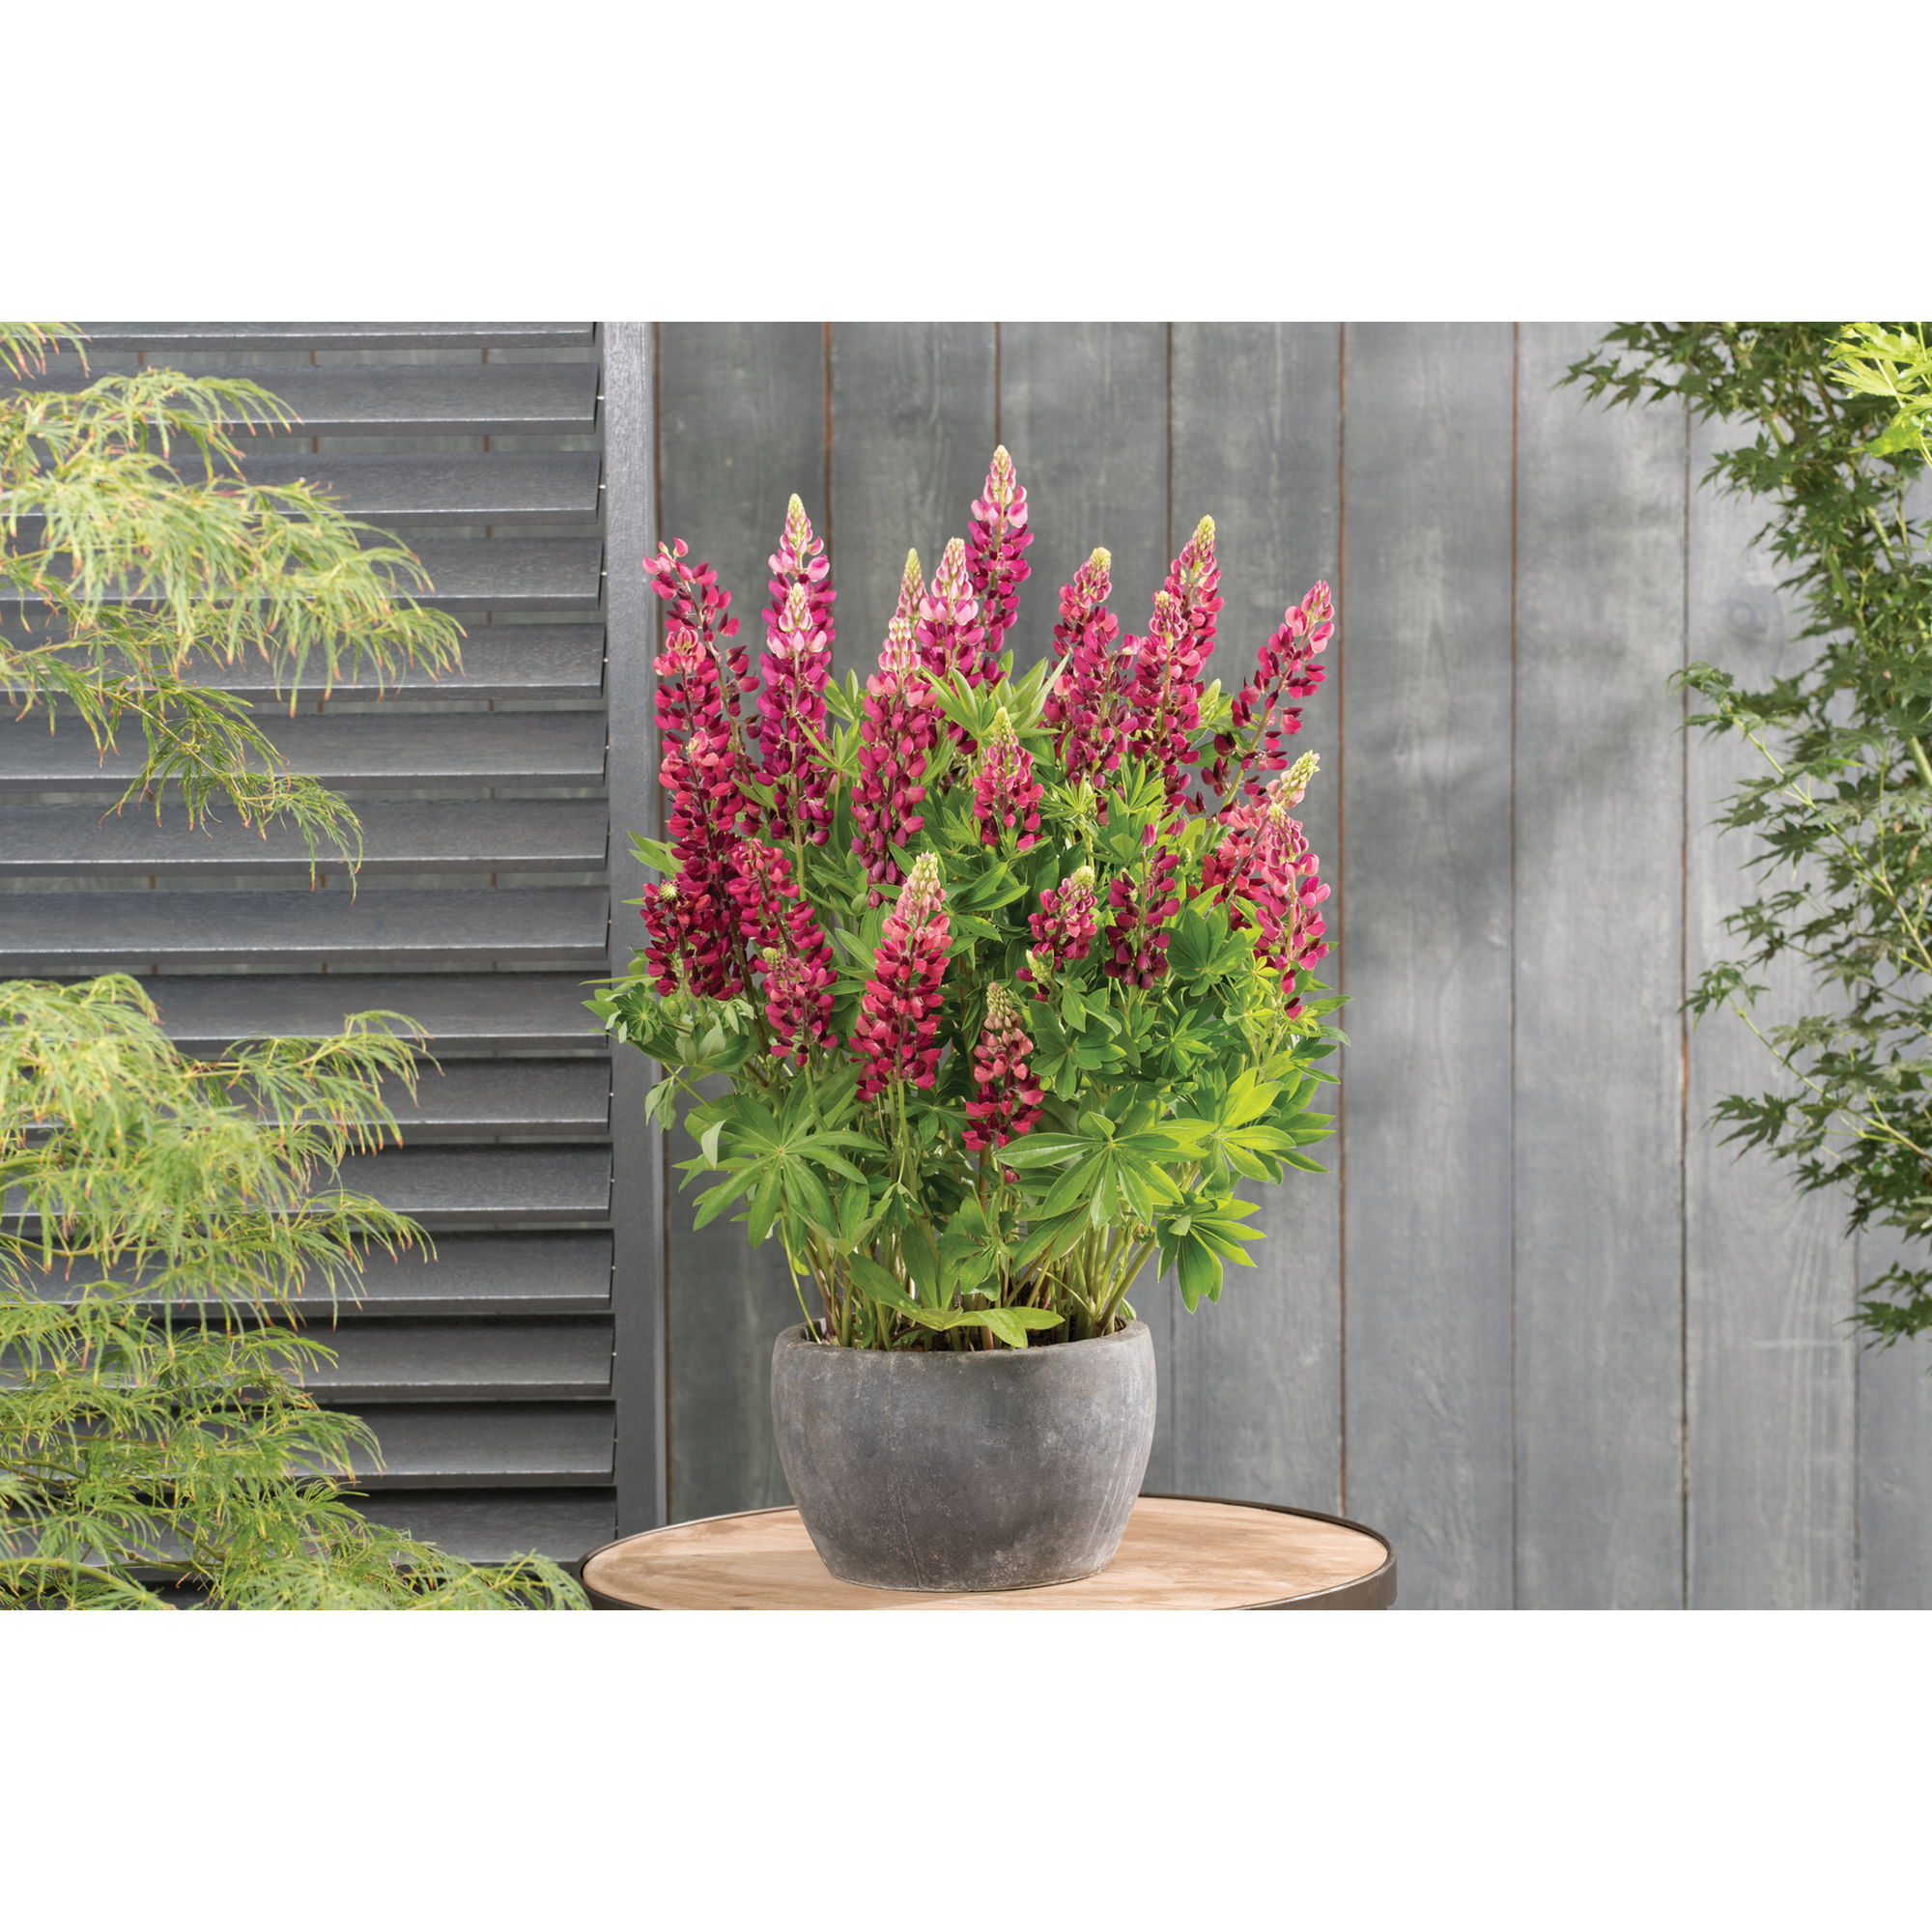 Lupine 'Gallery Red Shades' rot 11 cm Topf, 3er-Set + product picture